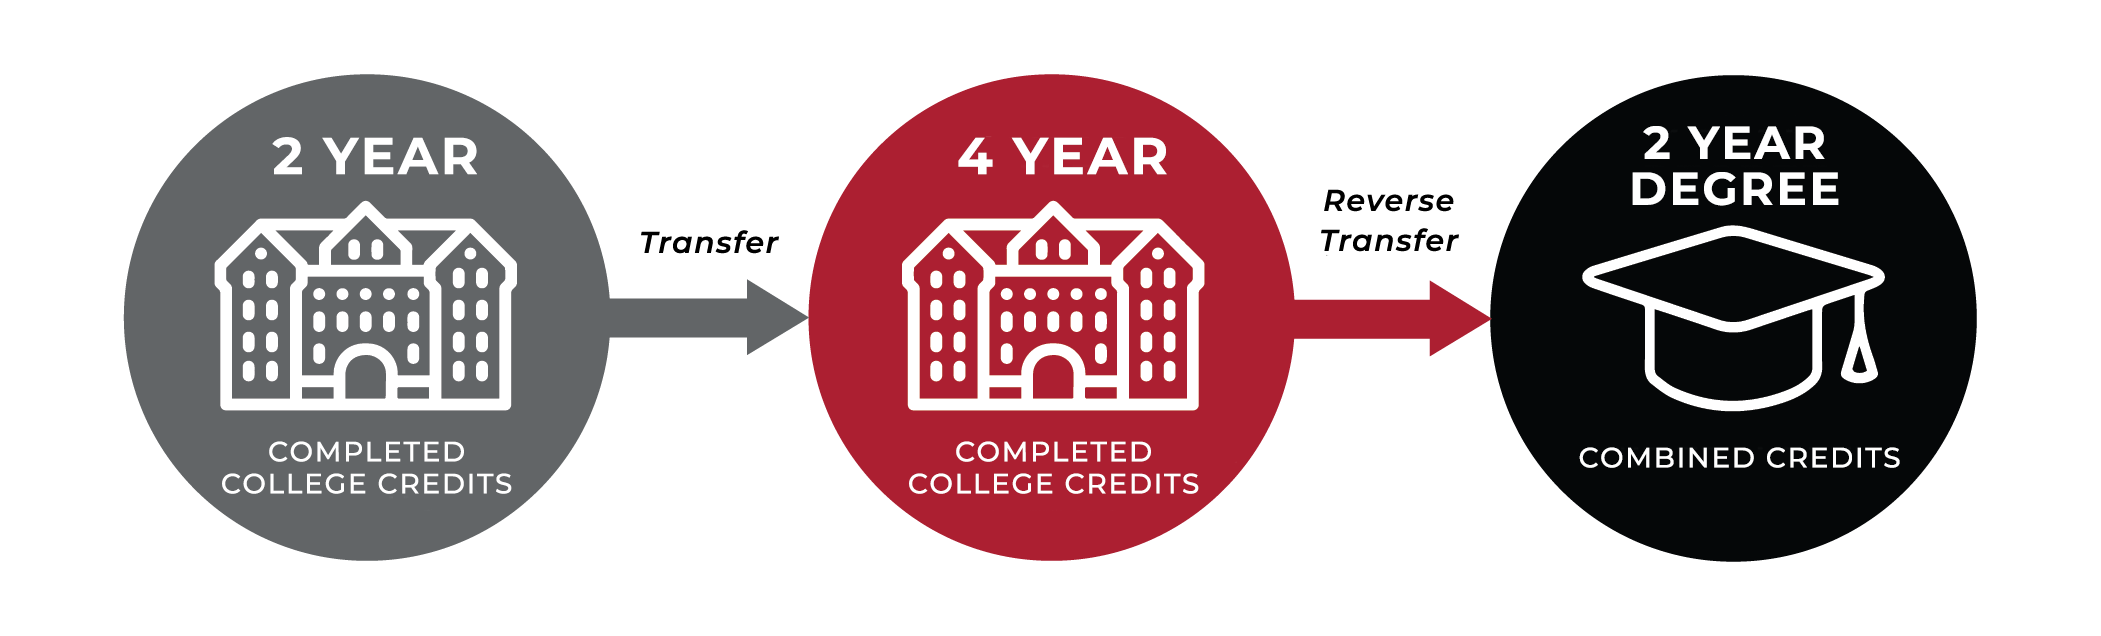 Circle Graphic showing 2 Years of Completed College credit transfers to 4 years of completed college credits leads to a reverse transfer of a 2 year degree of combined crediits